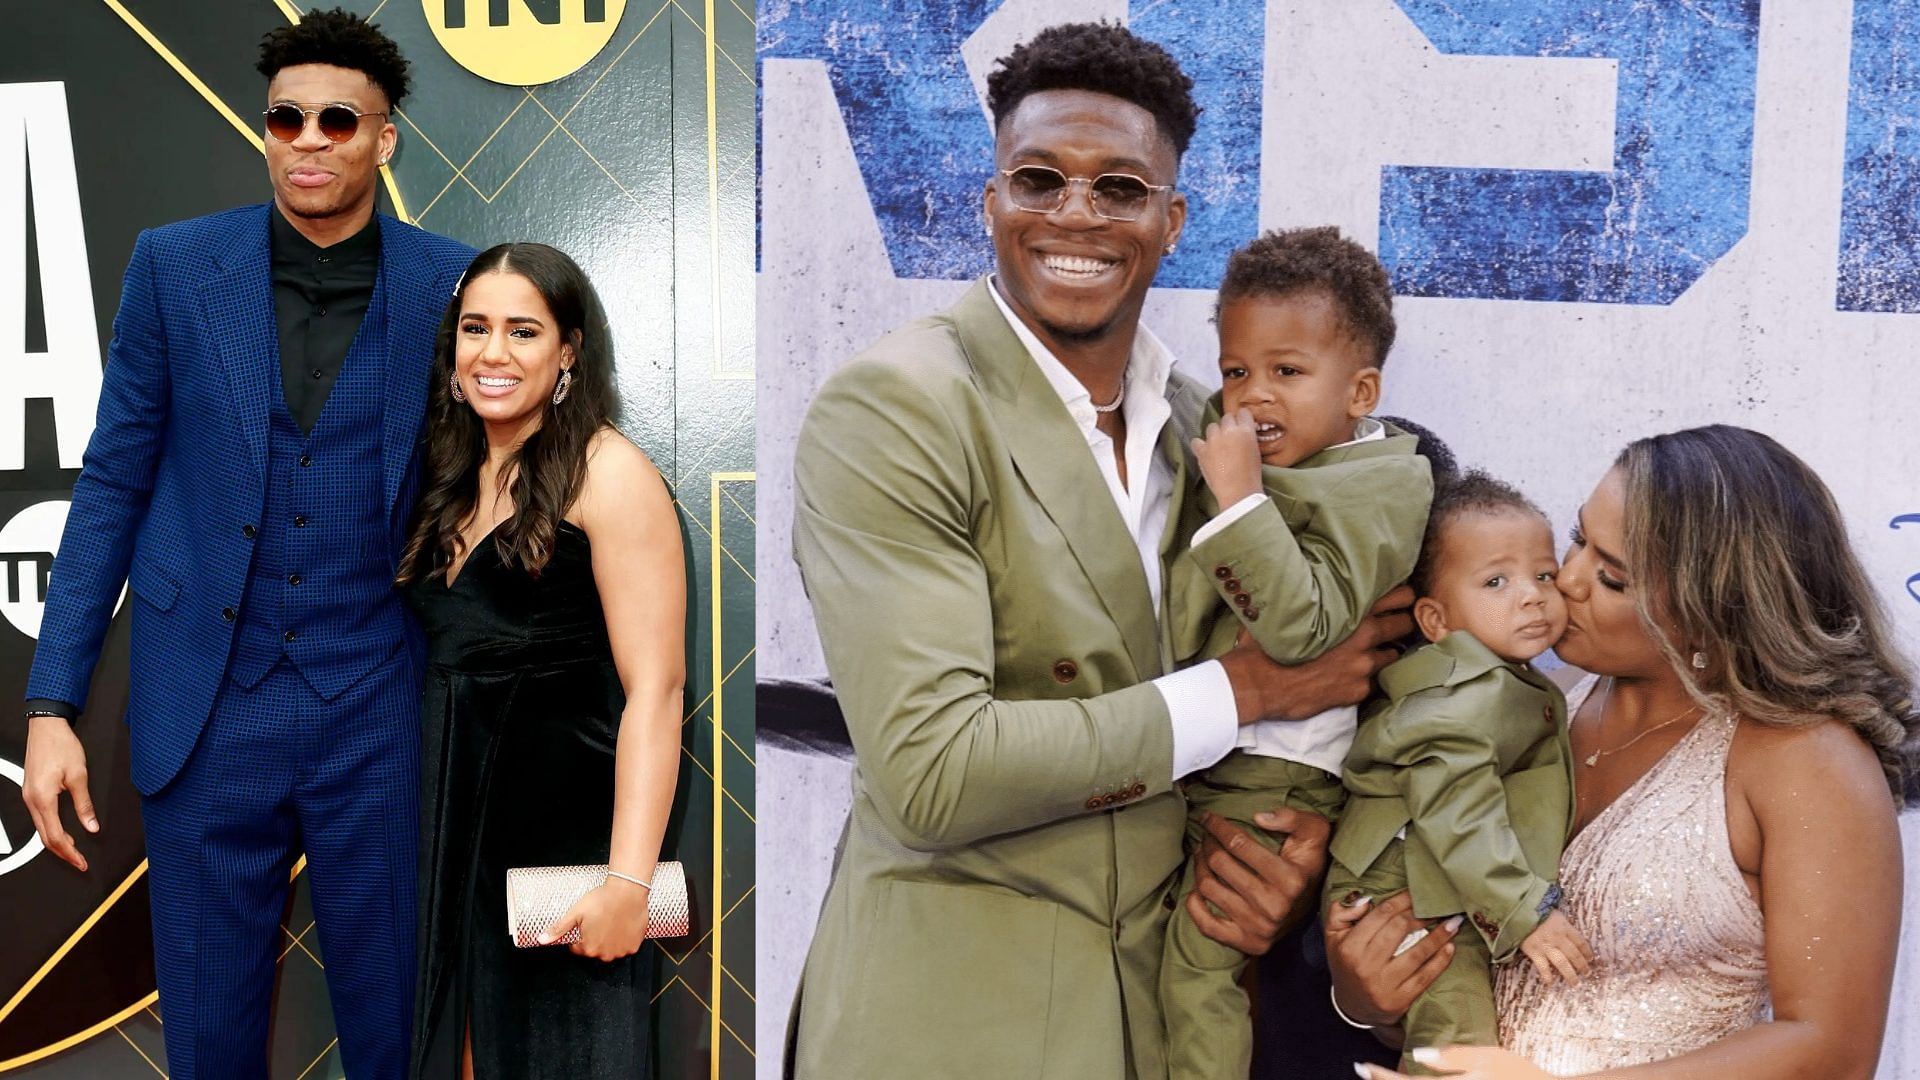 giannis Antetokounmpo with his wife and two kids